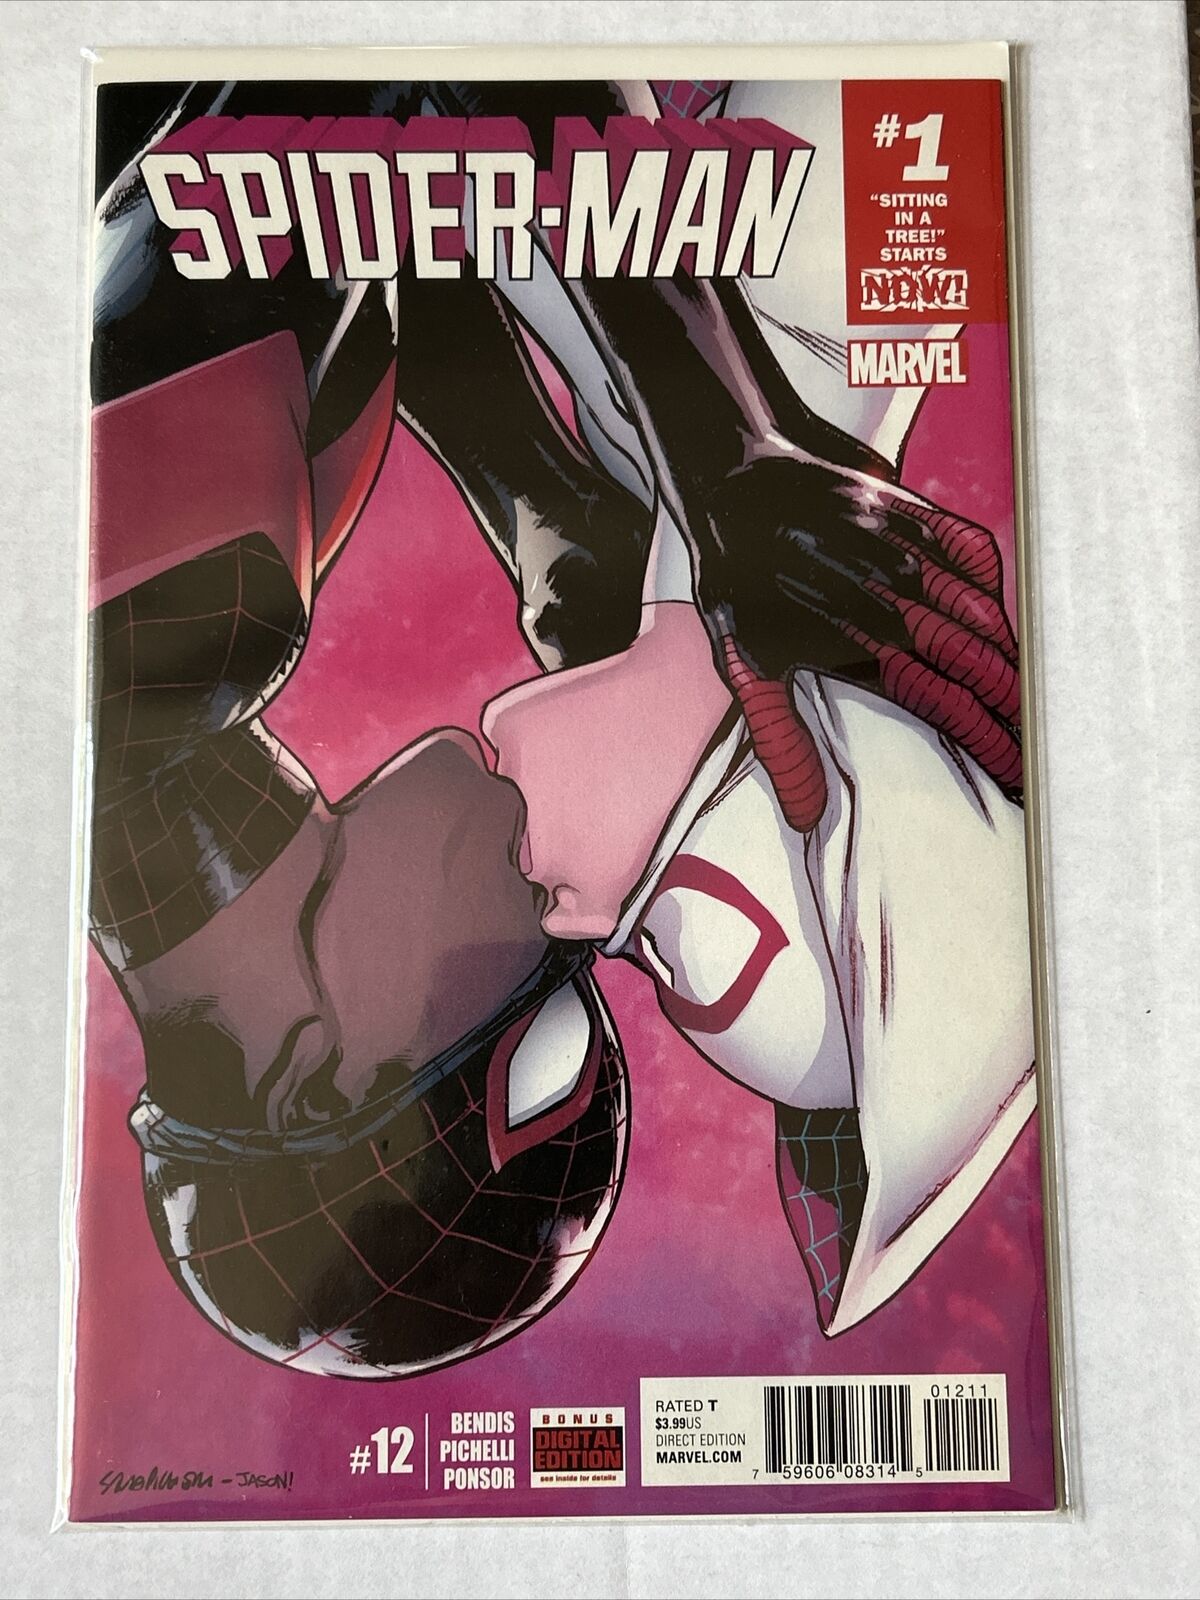 Spider-Man #12 - Miles Morales Gwen Stacy First Kiss - 2016 - NM